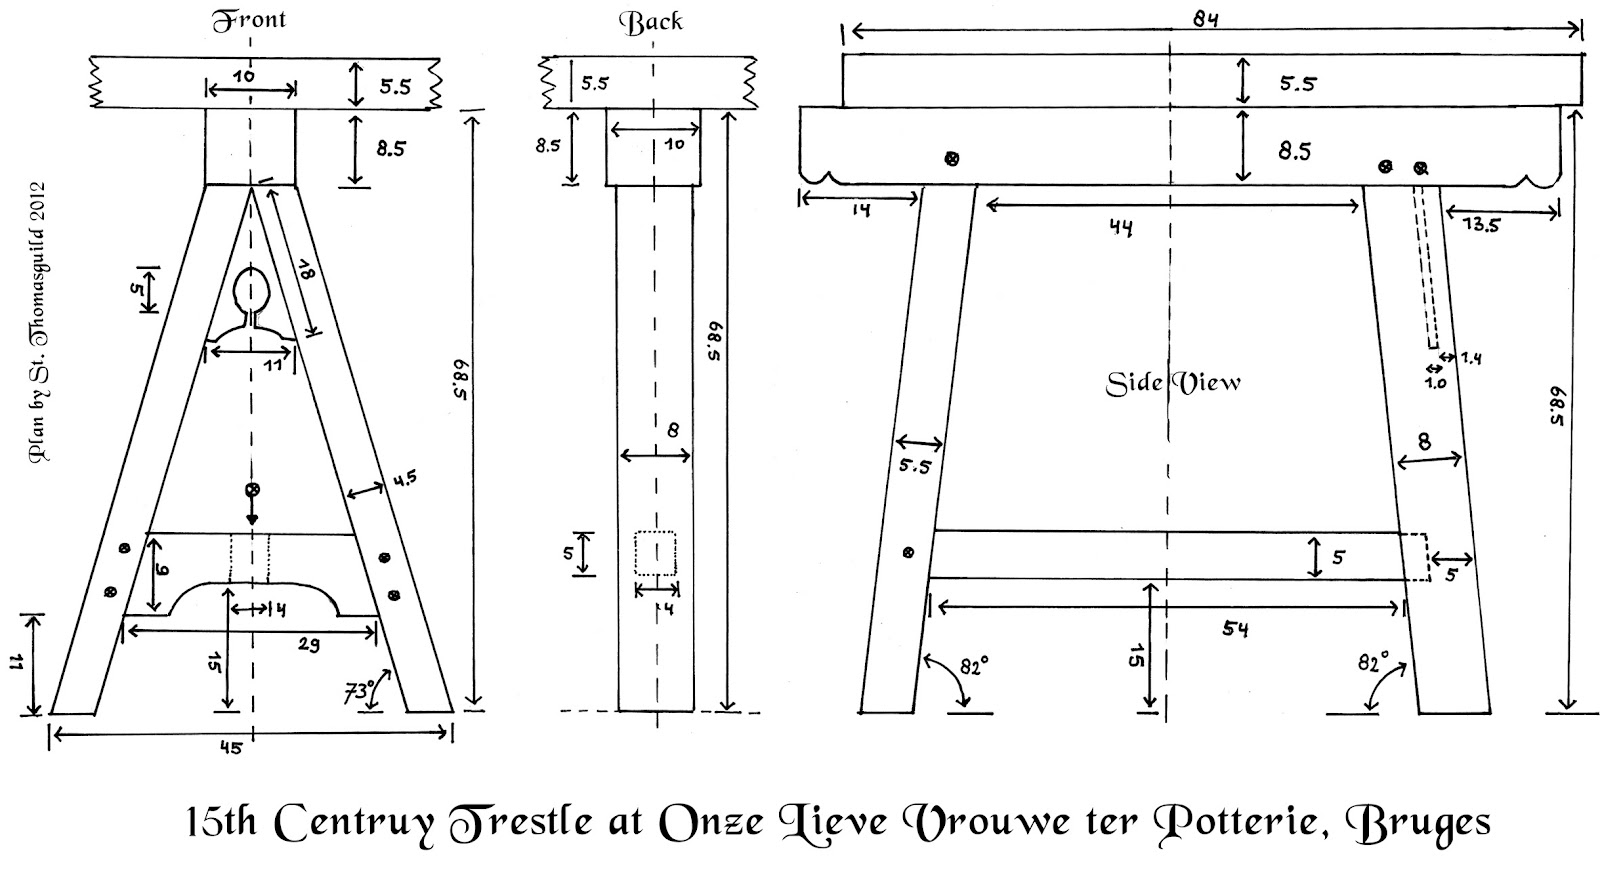  furniture and other crafts: A 15th century trestle table from Bruges